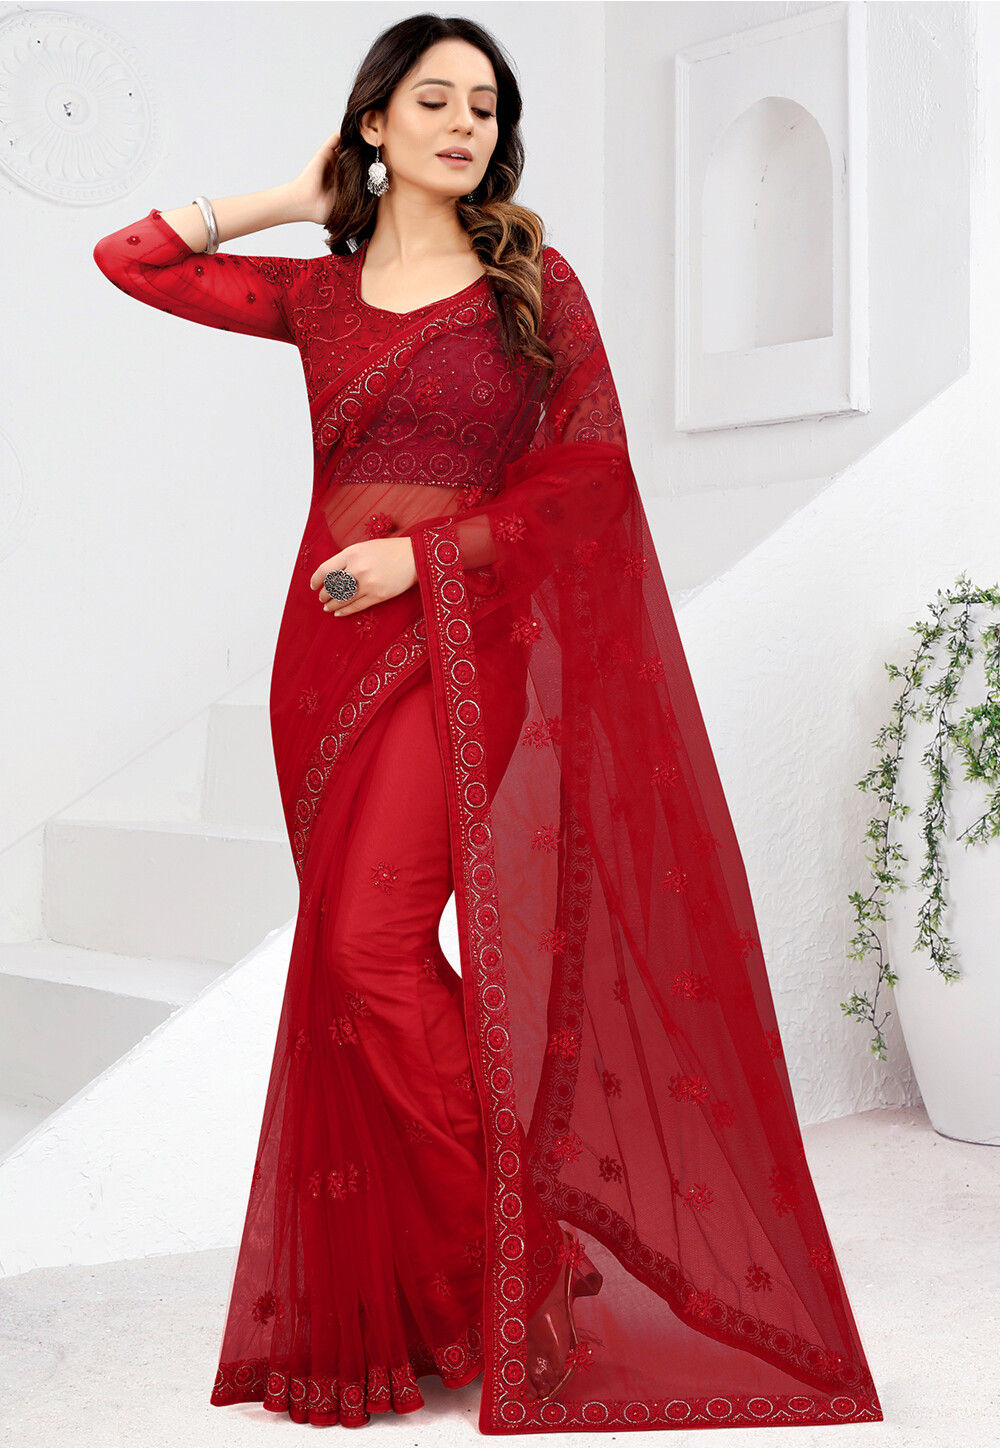 Black and Maroon Net Saree with Blouse Online Shopping: SKK14039 | Party  wear sarees, Saree designs, Indian dresses